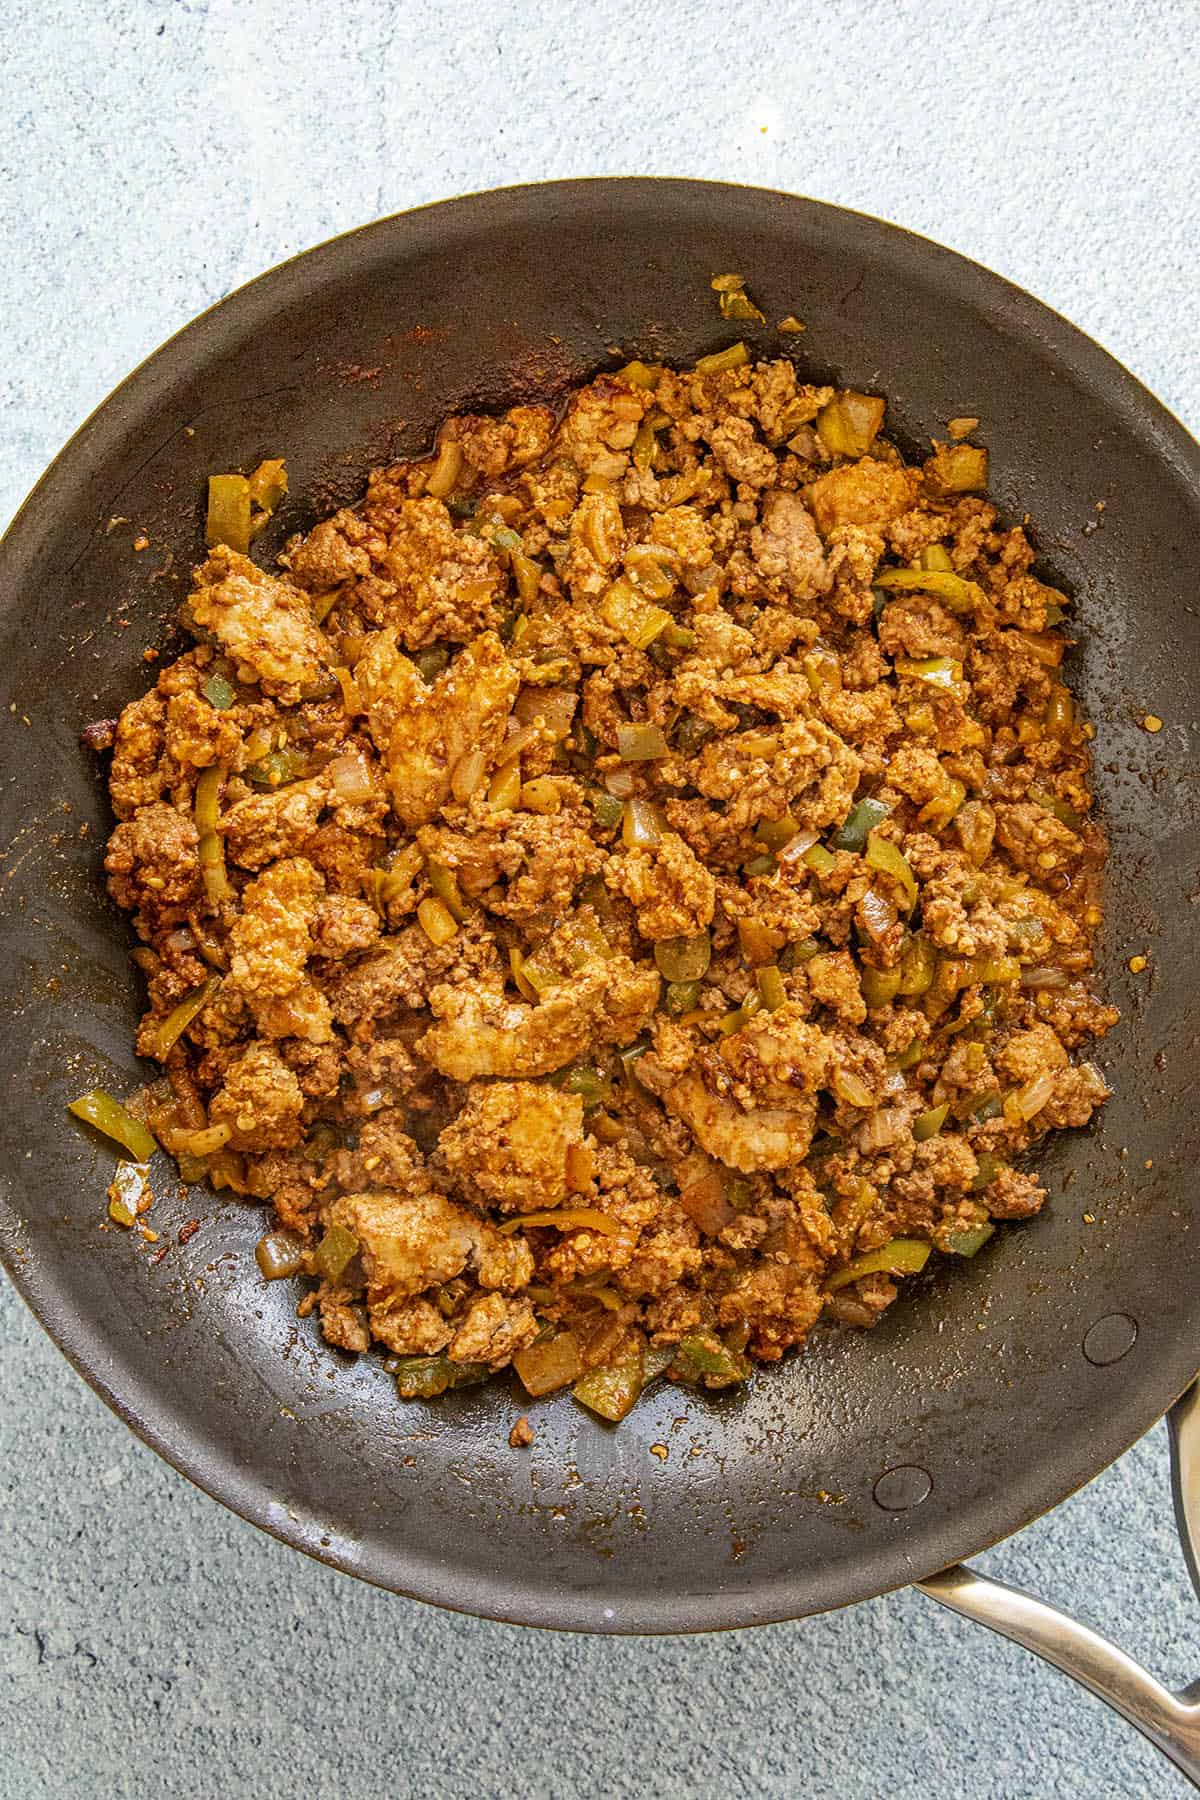 Cooked beef, vegetables, and spices in a pan